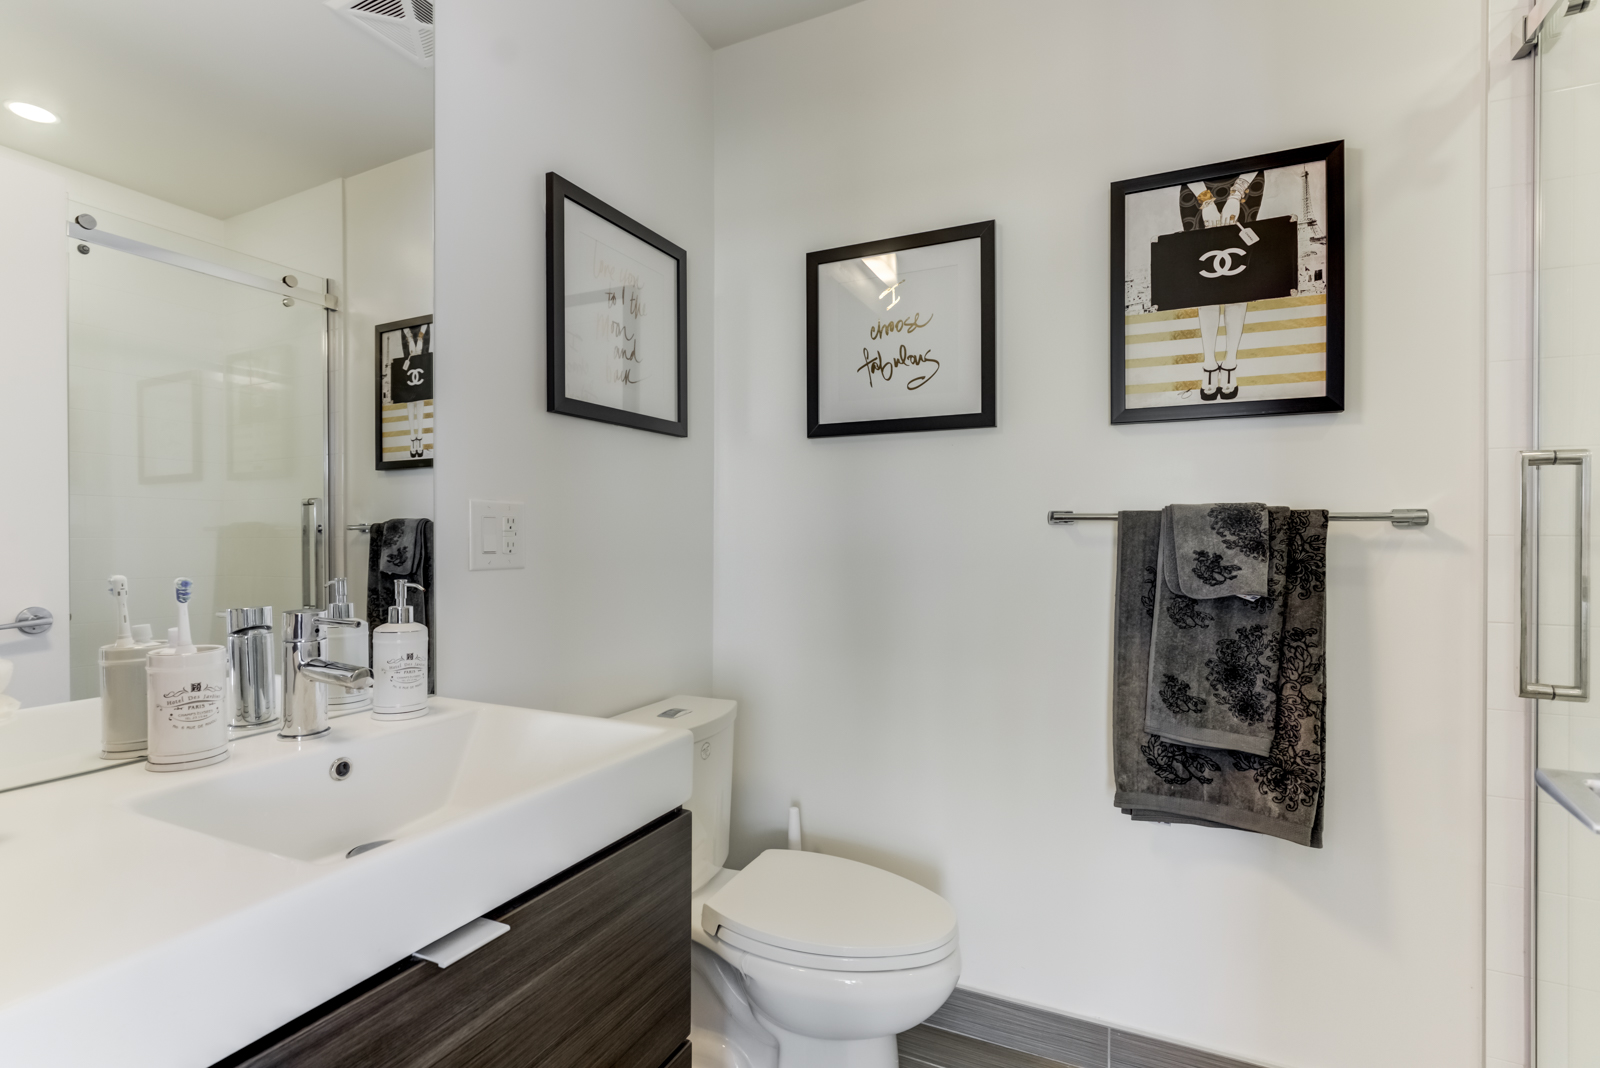 Second bathroom with dark picture frames, dark towel, white sink, and tall mirror.